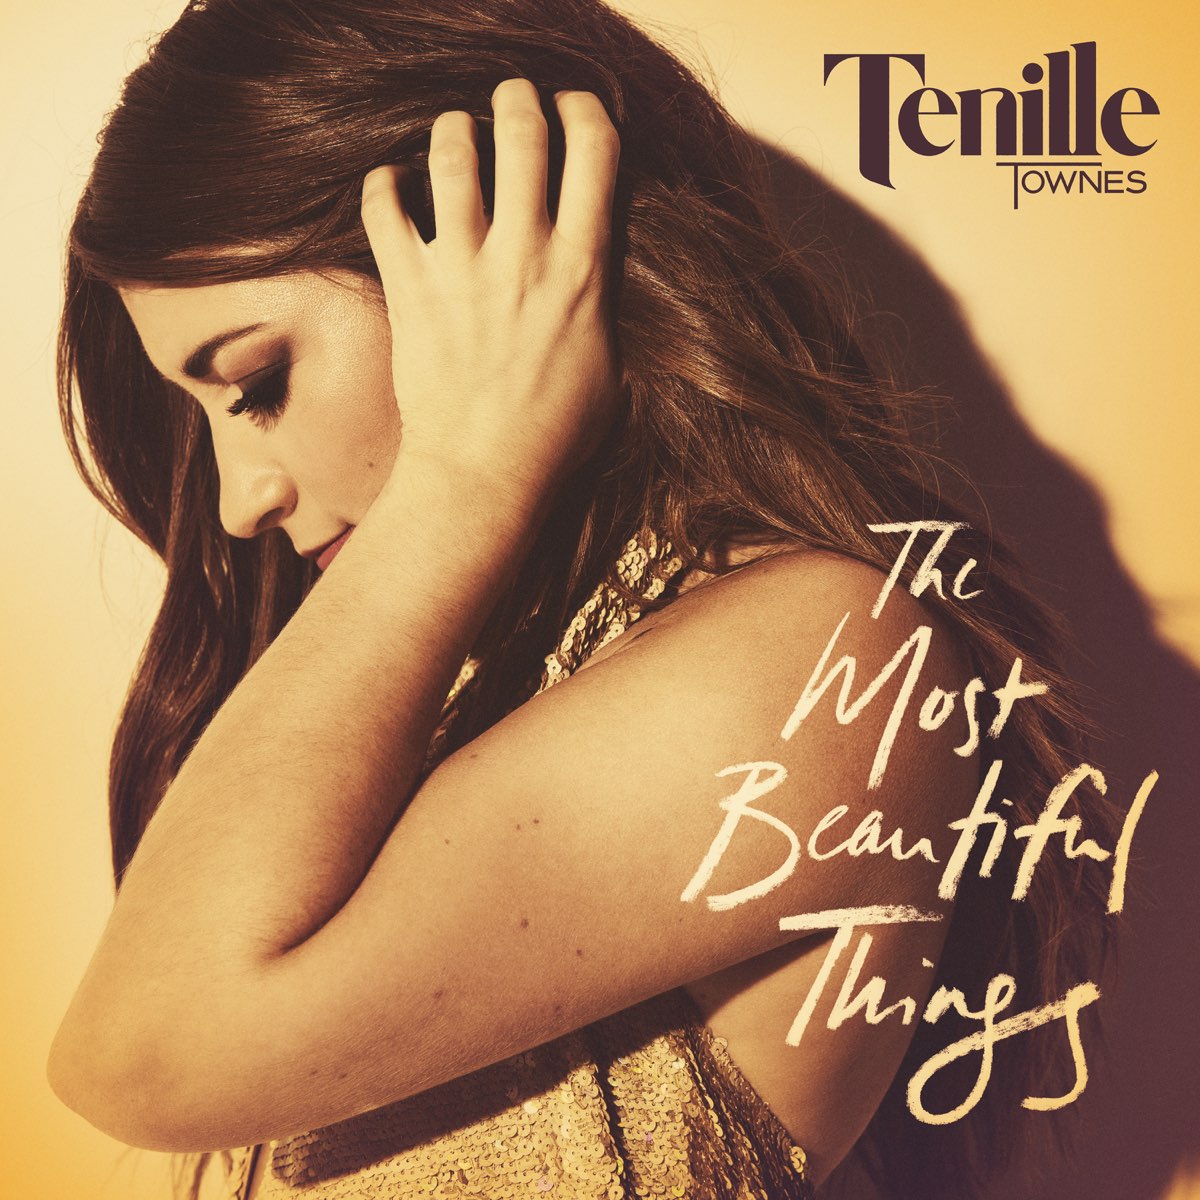 Tenille Townes. Mp3 so many beautiful things.